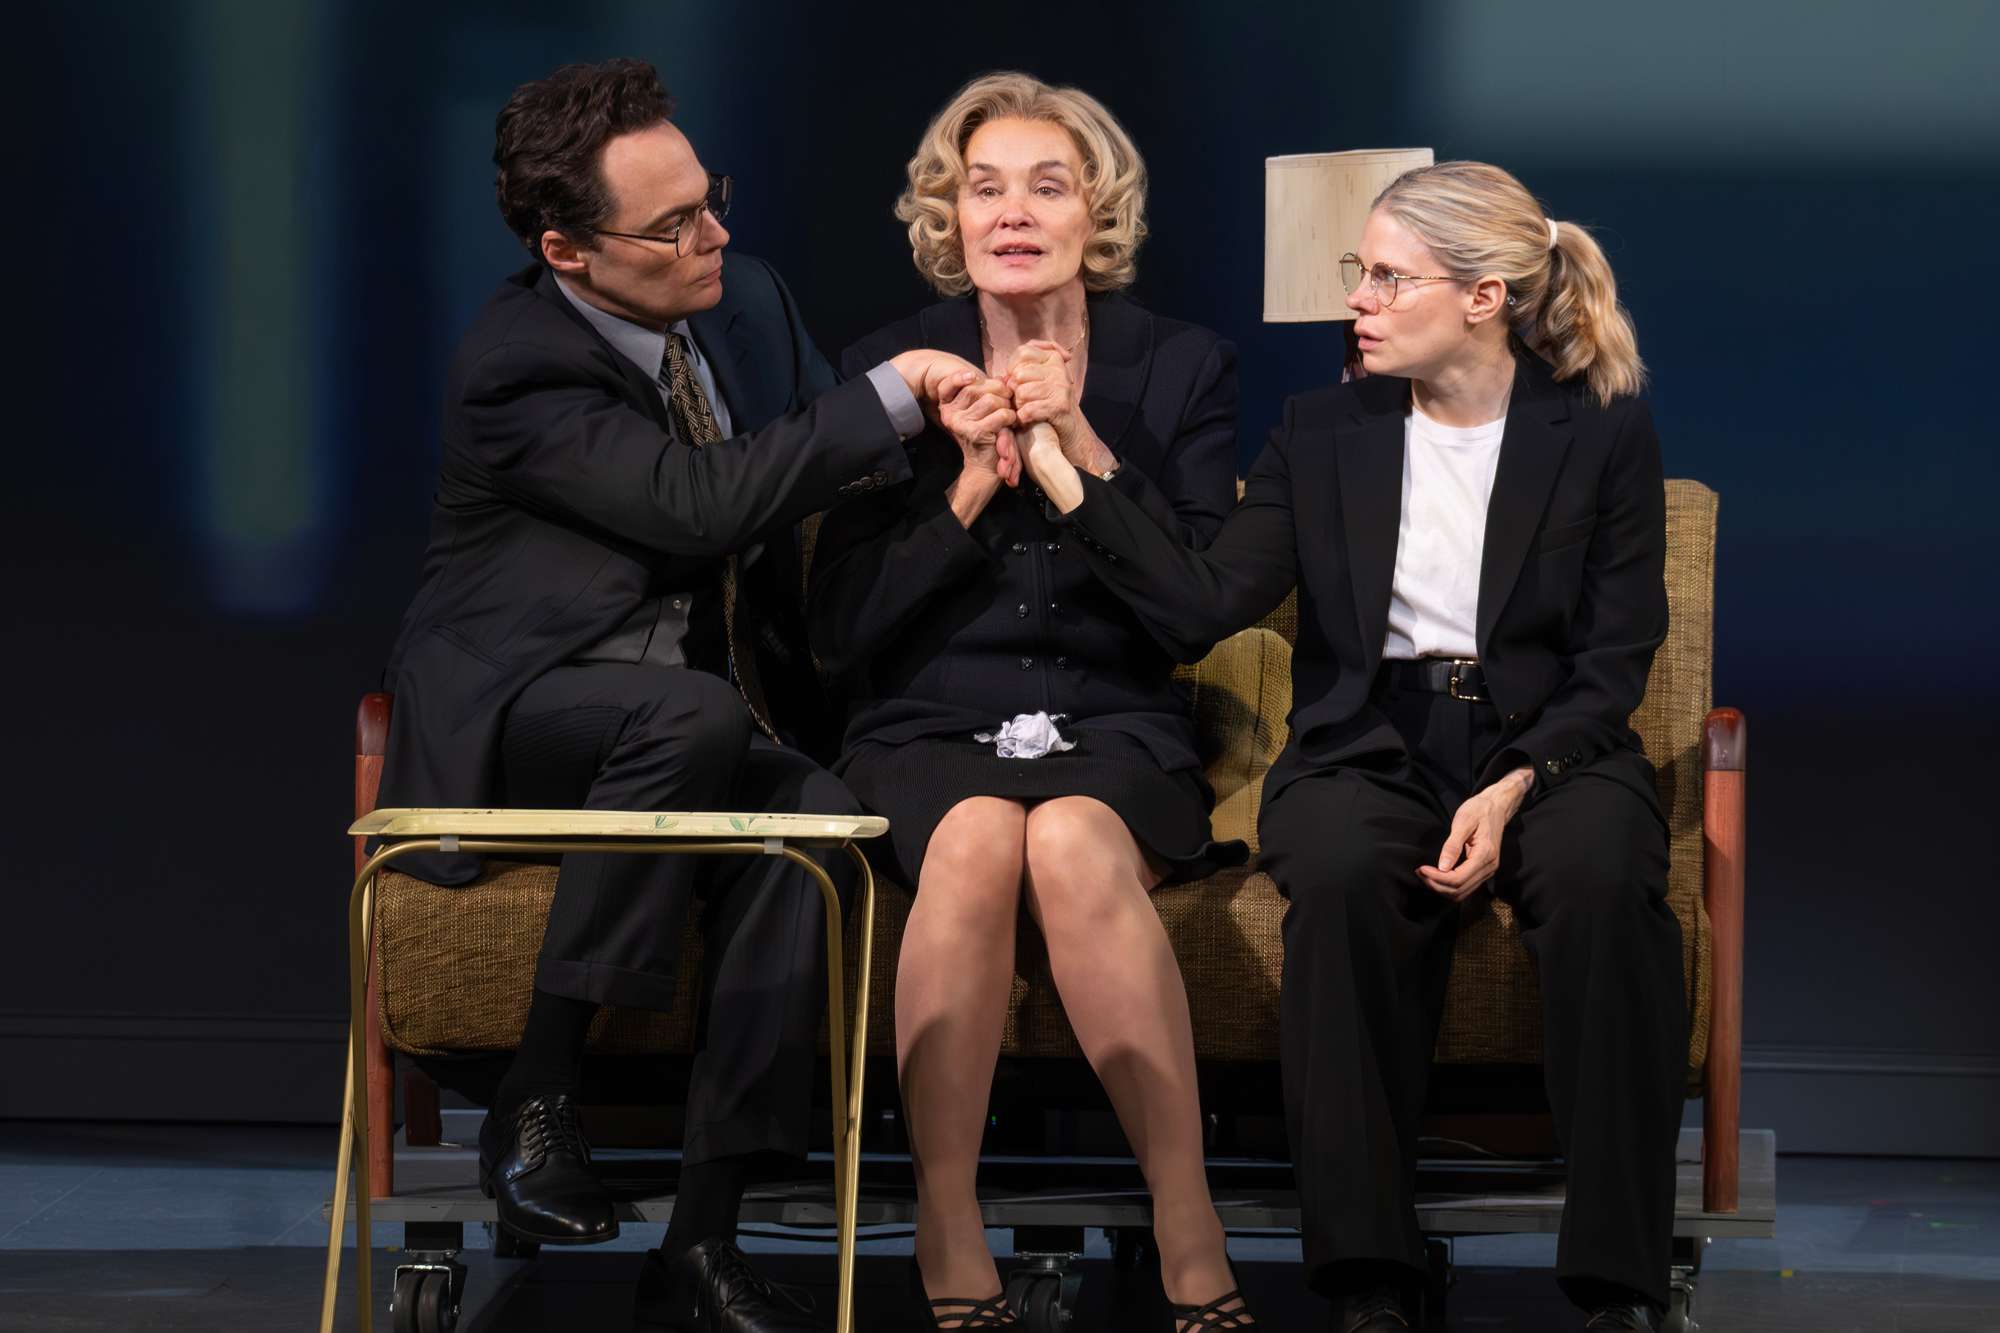 Jessica Lange Calls “Mother Play” with Jim Parsons and Celia Keenan-Bolger 'One of the Great Joys of My Life'